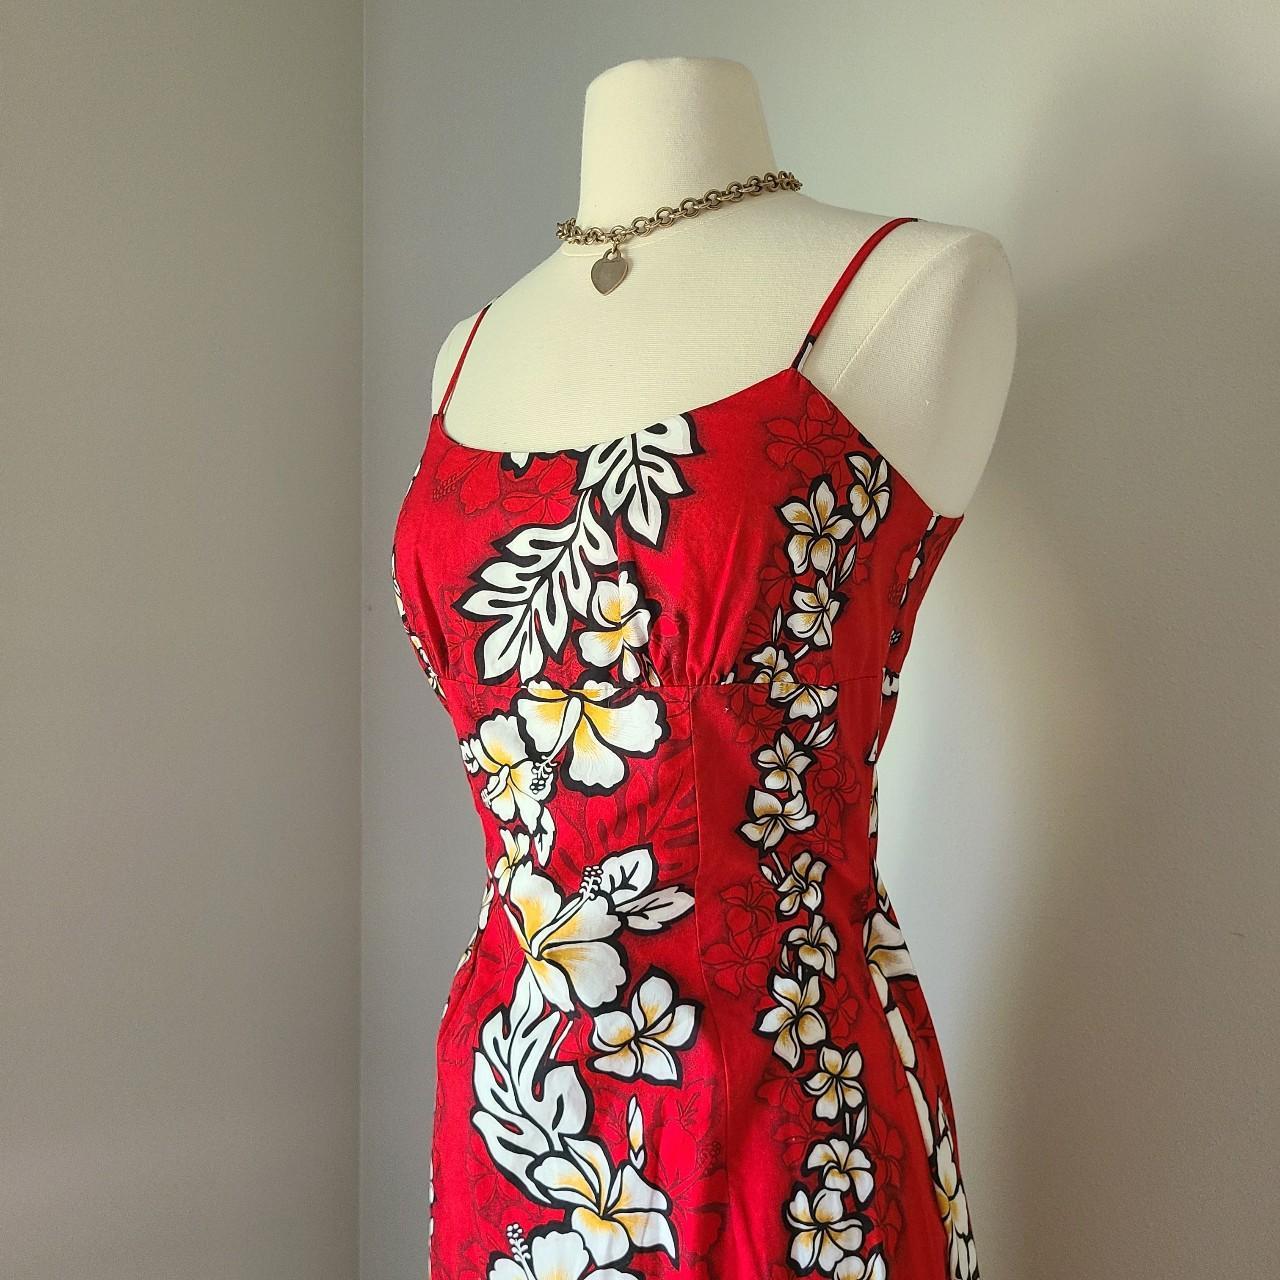 American Vintage Women's Red and White Dress (2)